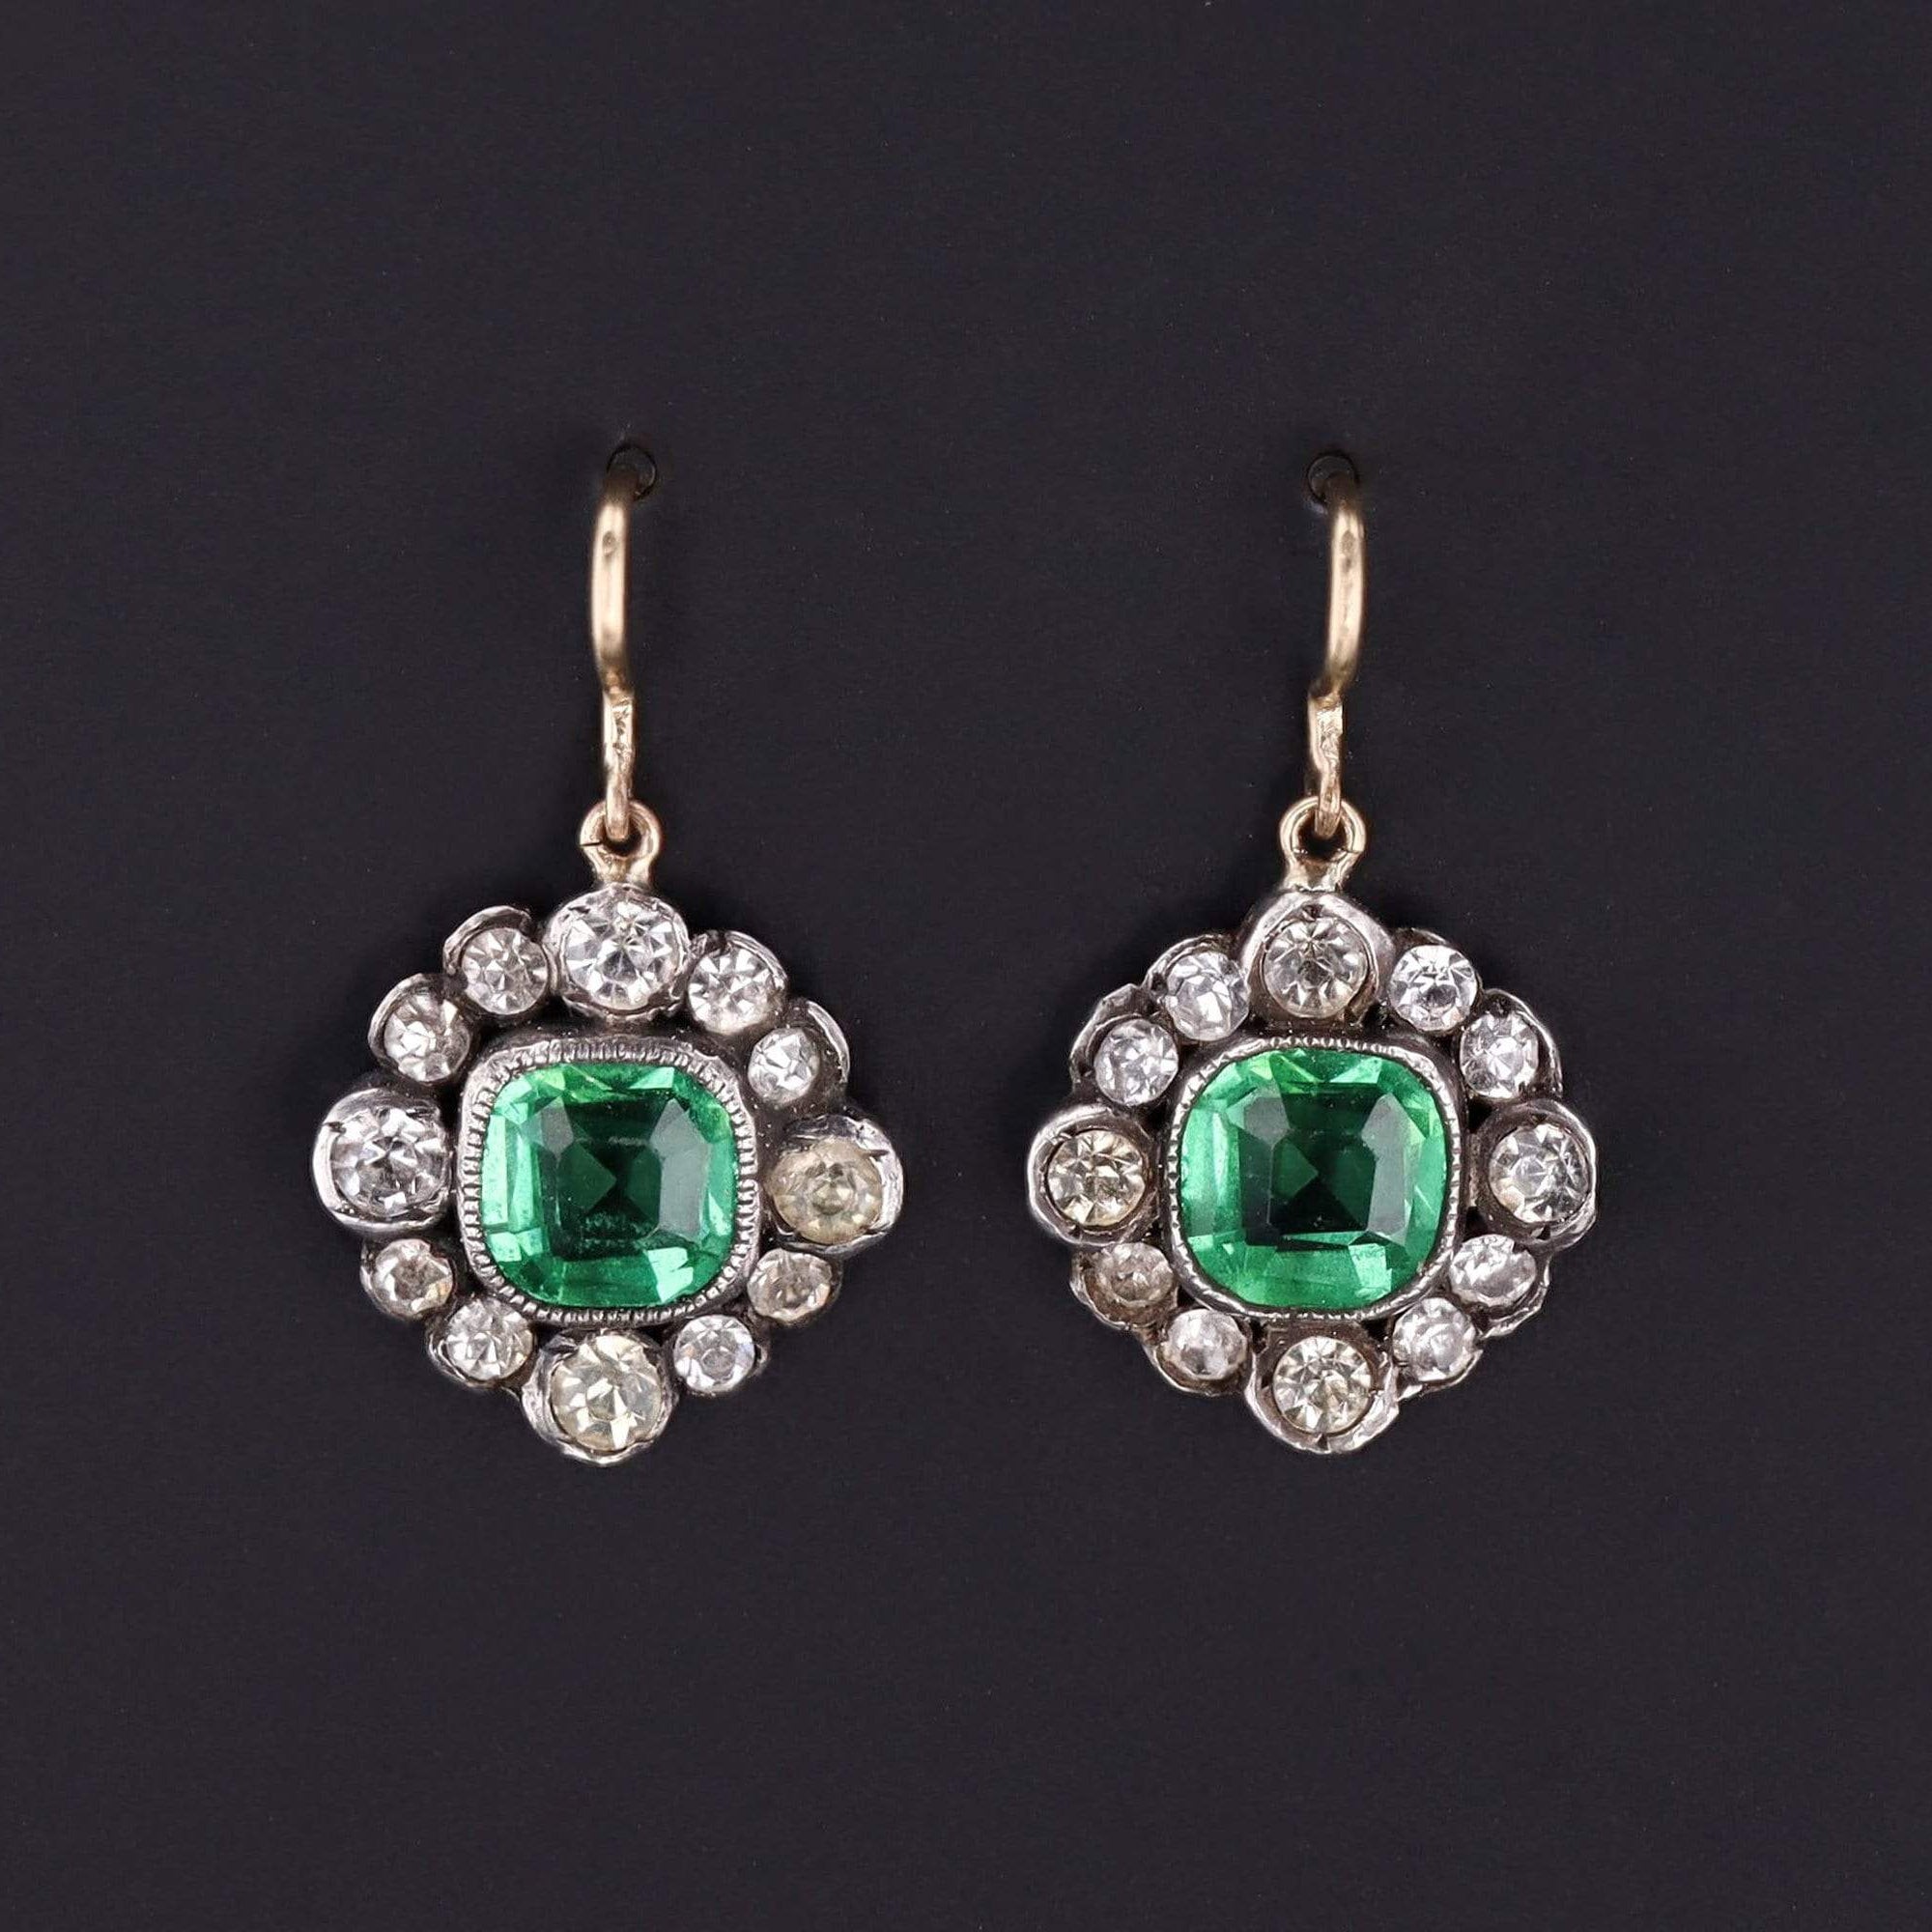 Antique Green and Clear Paste Earrings | 14k Gold & Silver Earrings 